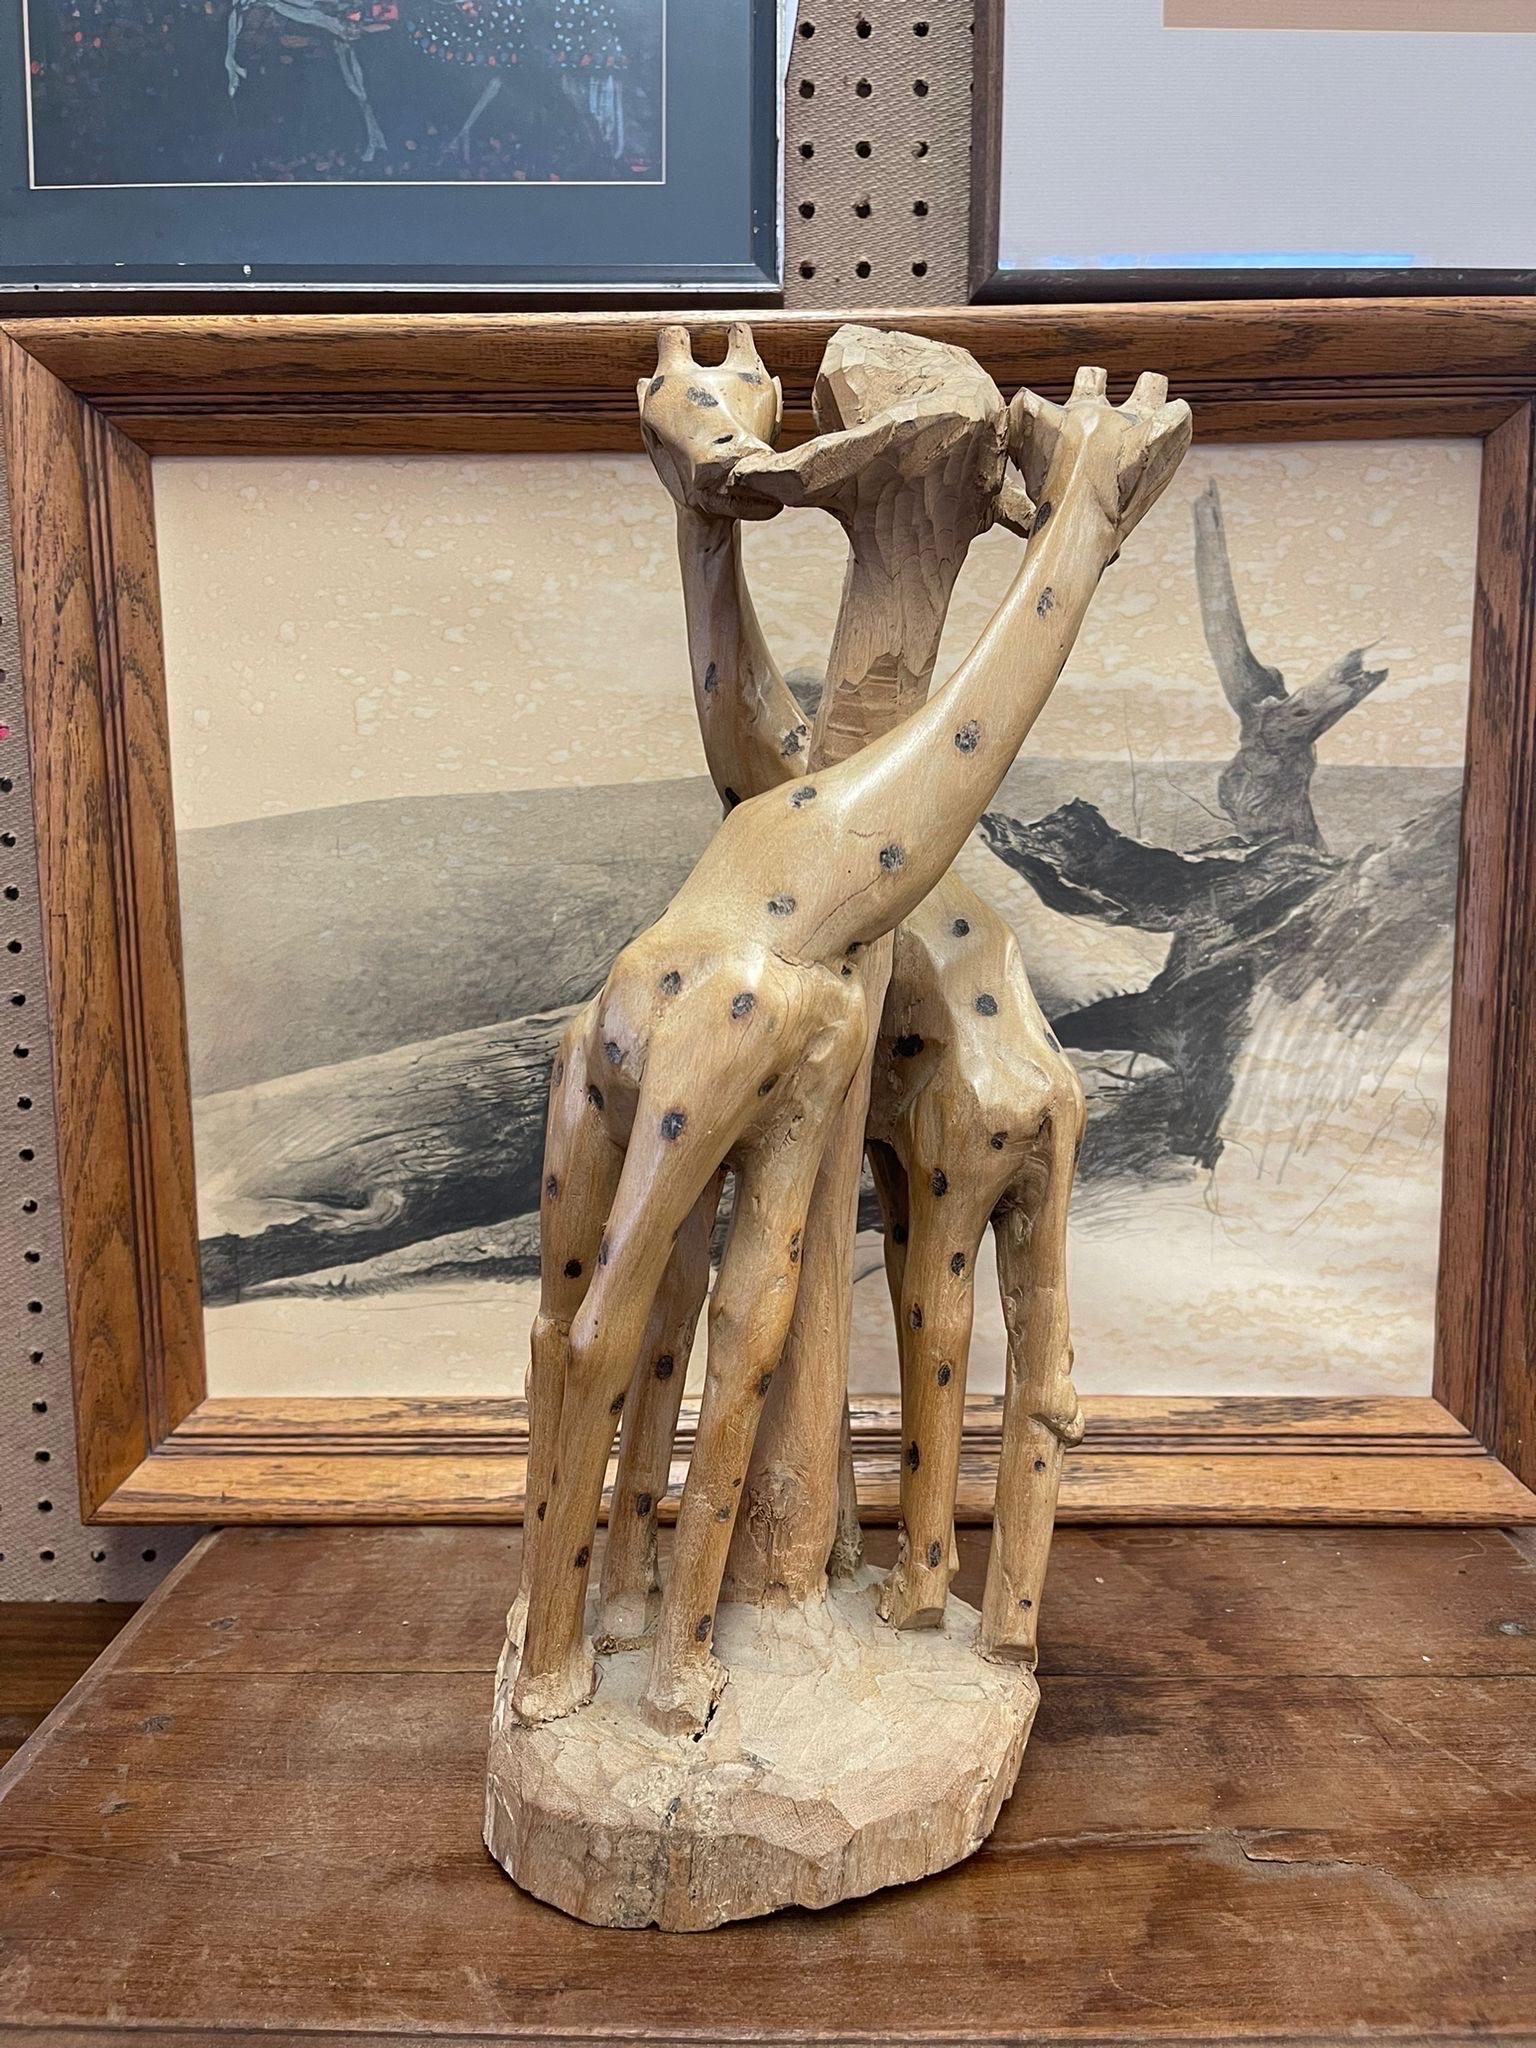 This Vintage Piece Features Two Carved Giraffes Circling a Tree. Rustic Design. The Spots Appear to Have Been Intentionally Burnt into the Giraffes. Vintage Condition Consistent with Age as Pictured.

Dimensions. 6 W ; 6 D ; 20 H